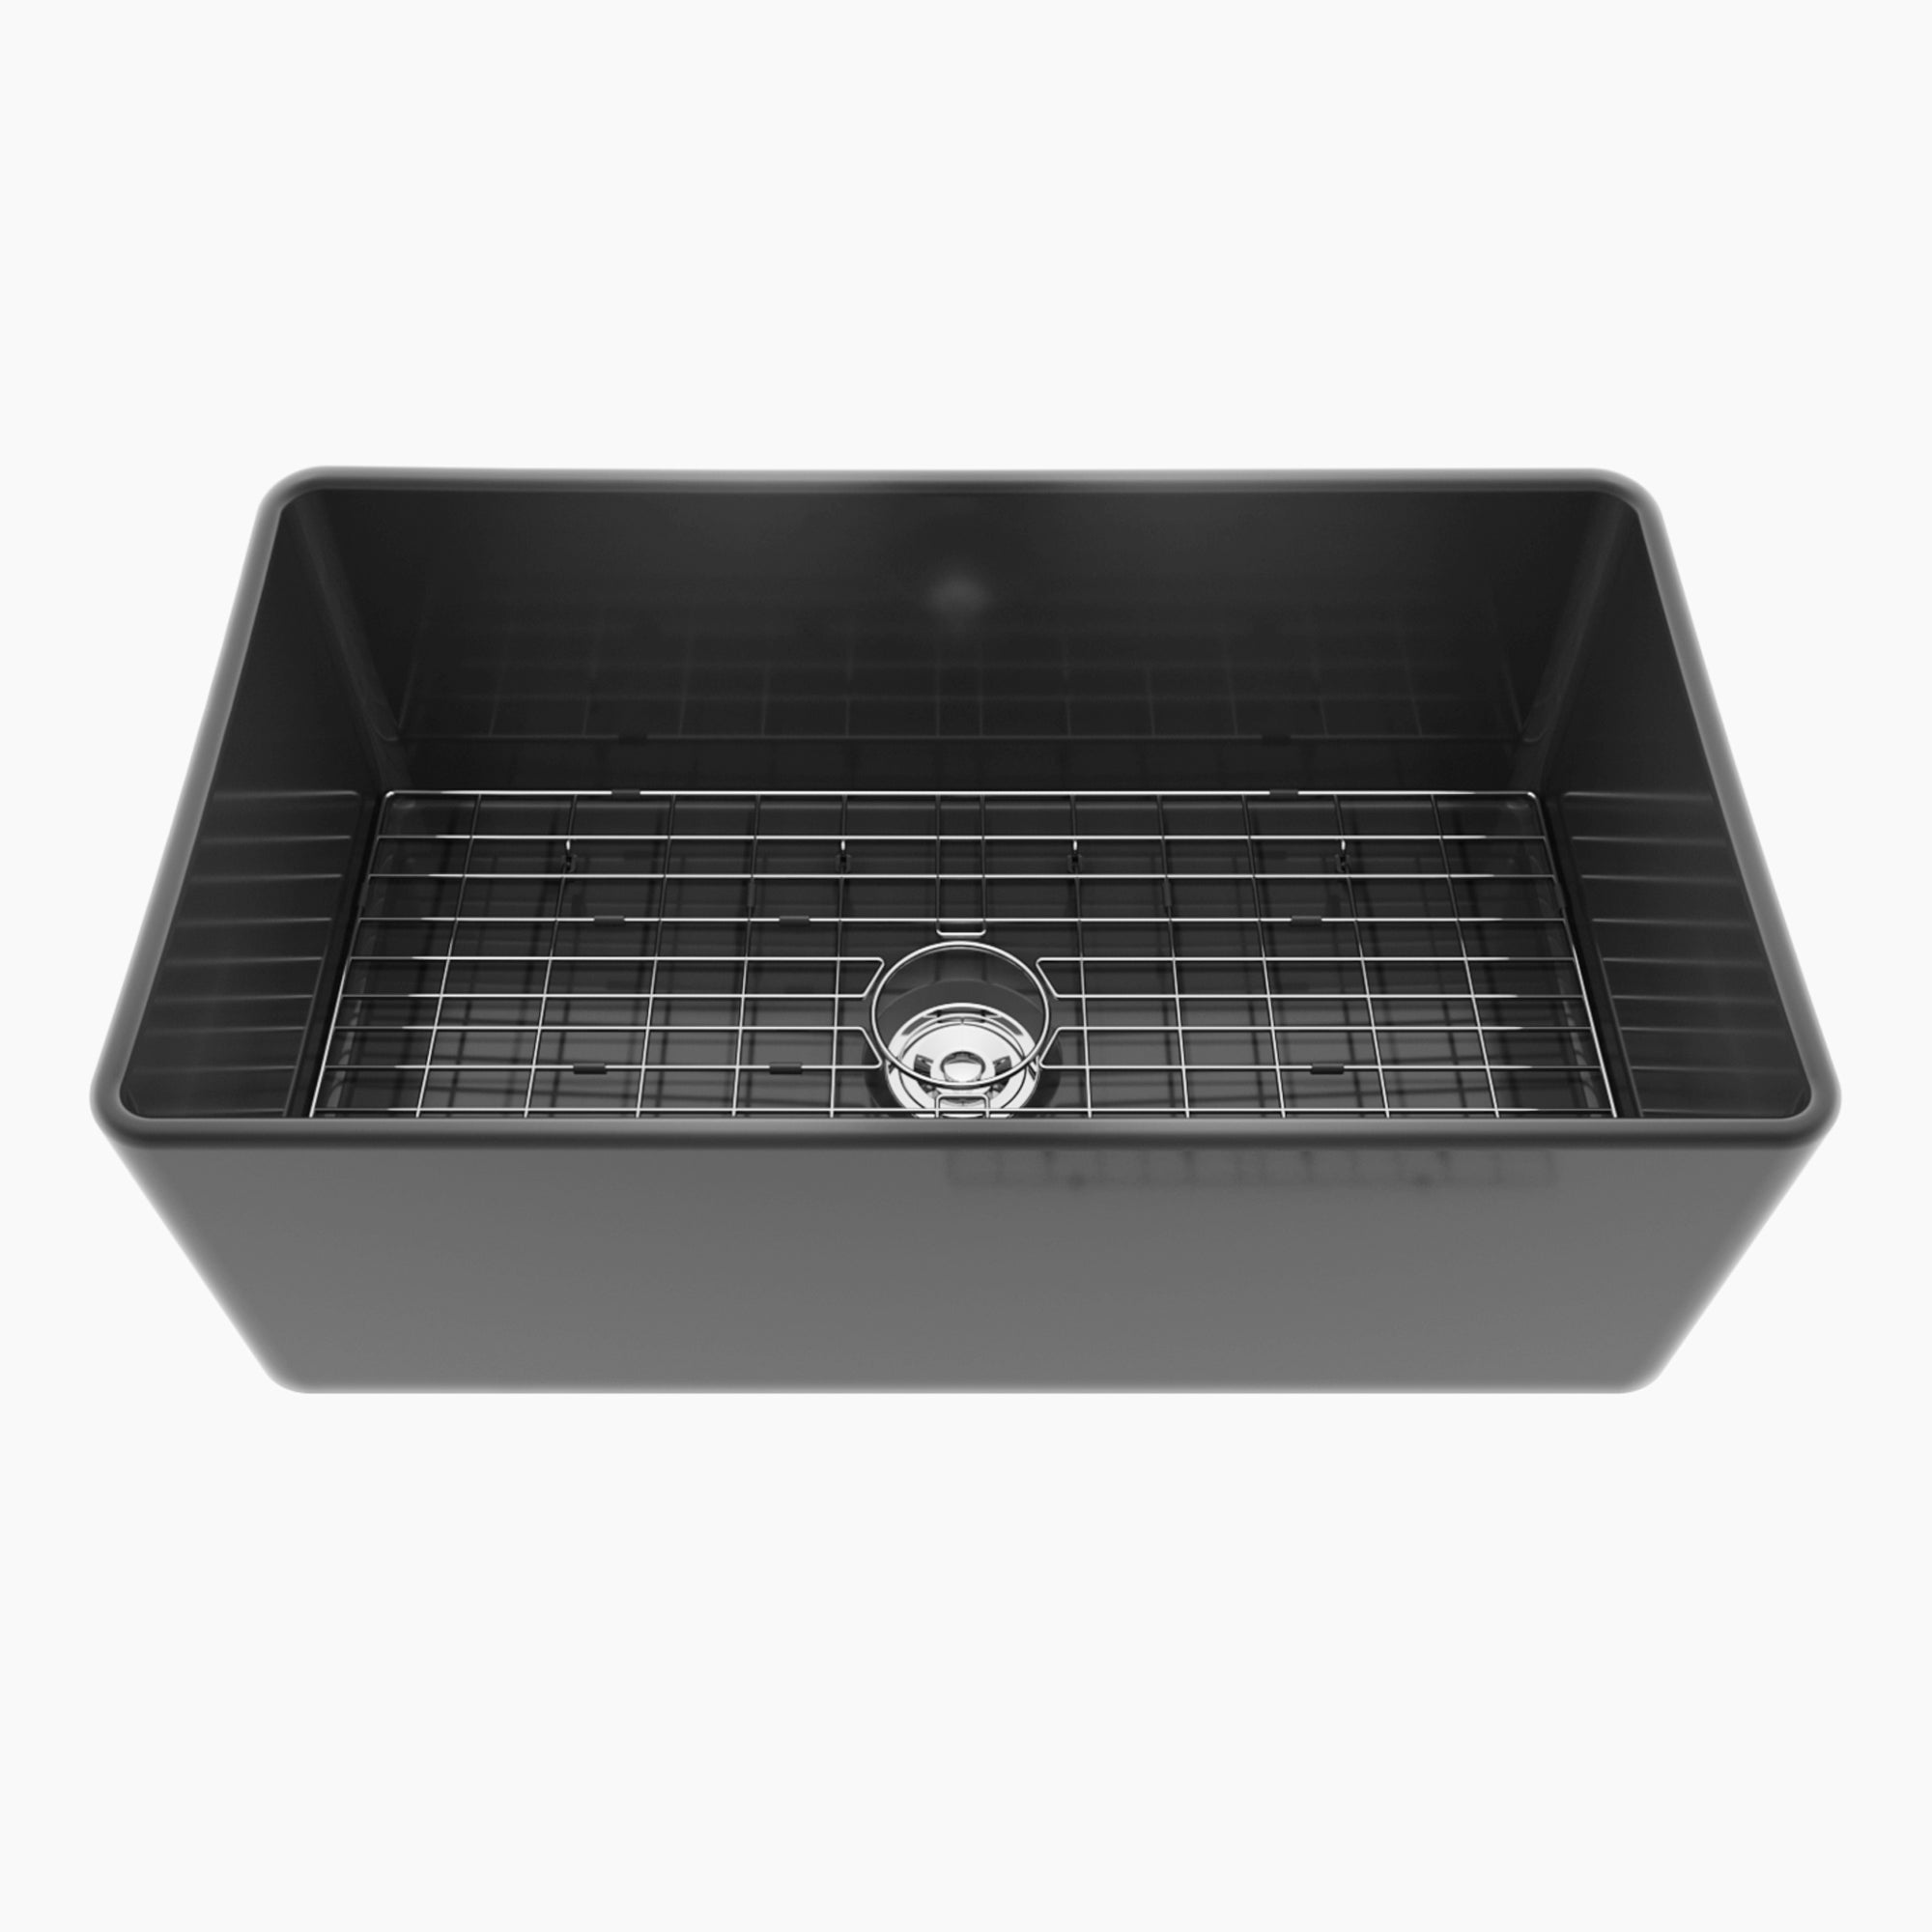 HOROW 33 Inch Sink With Grid and Basket Strainer For Farm Kitchen Model HR-S3318B